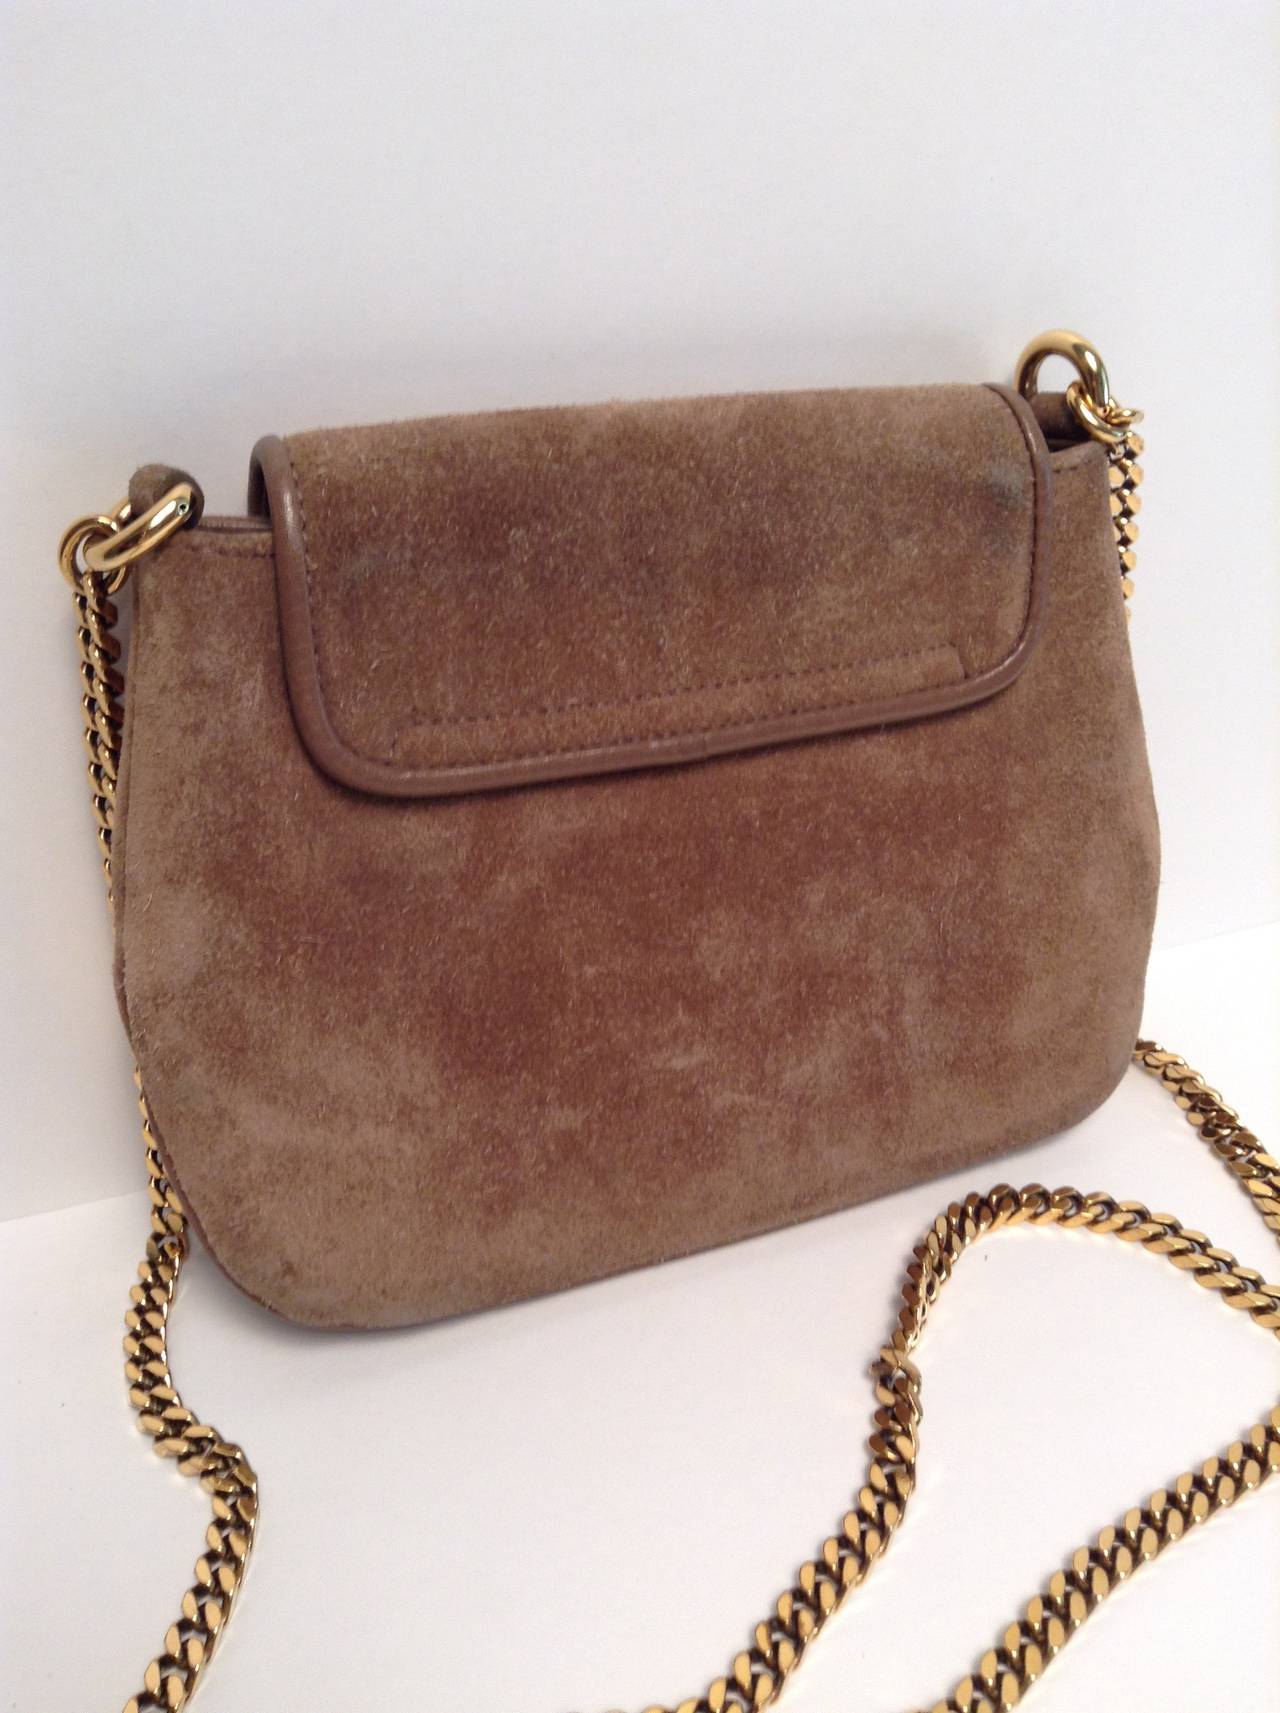 Gucci Taupe Suede Gold Chain Bag 1973 Reissue 6